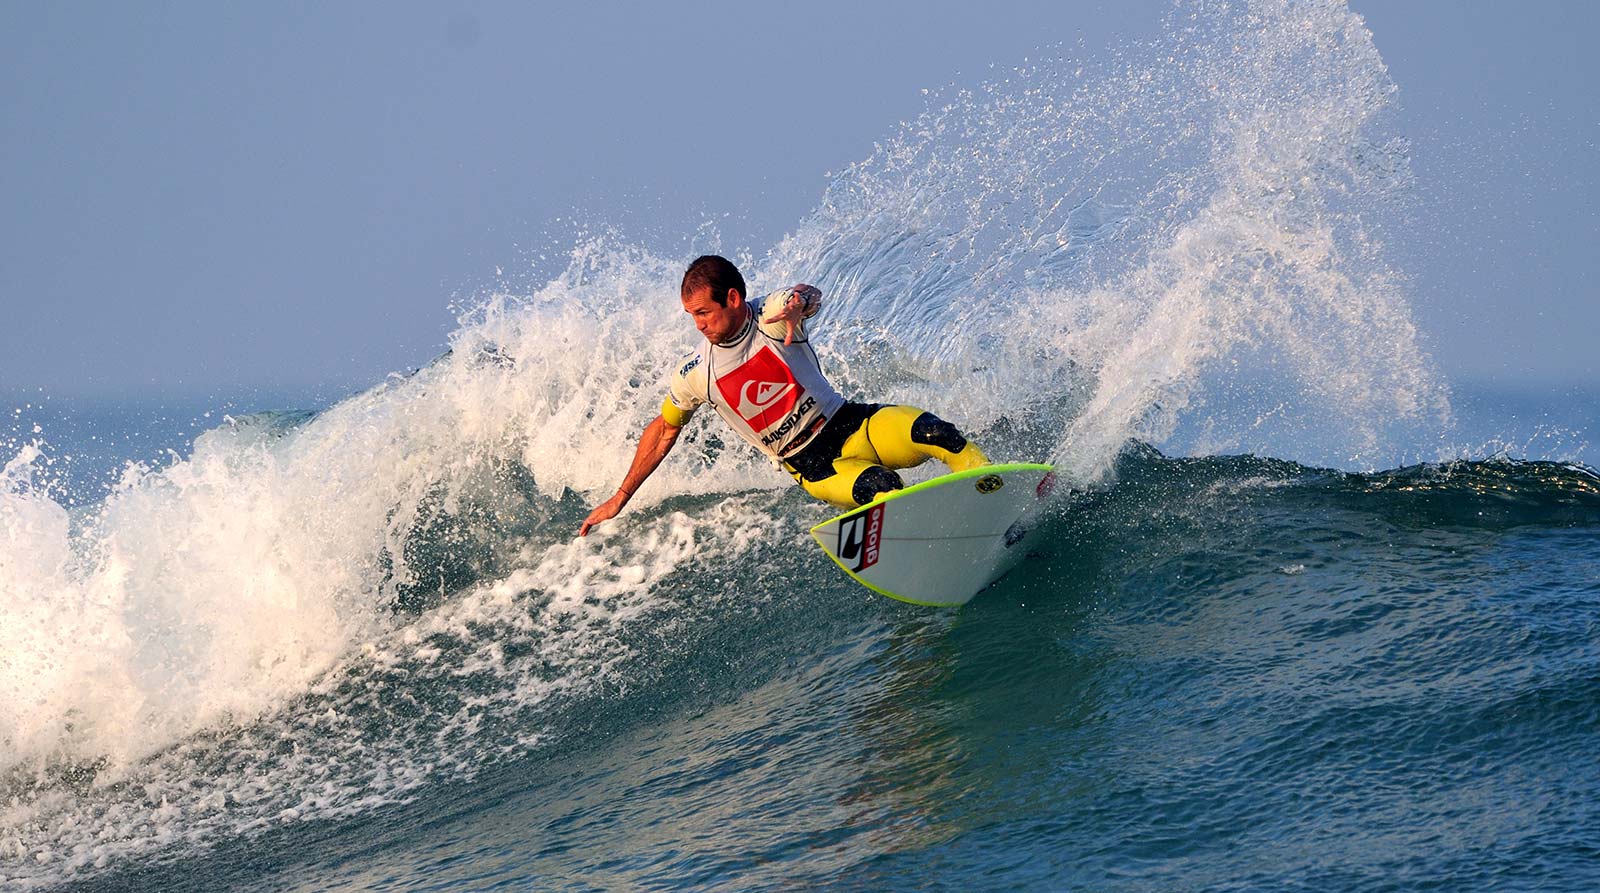 Surfing during a surf competition in Hossegor